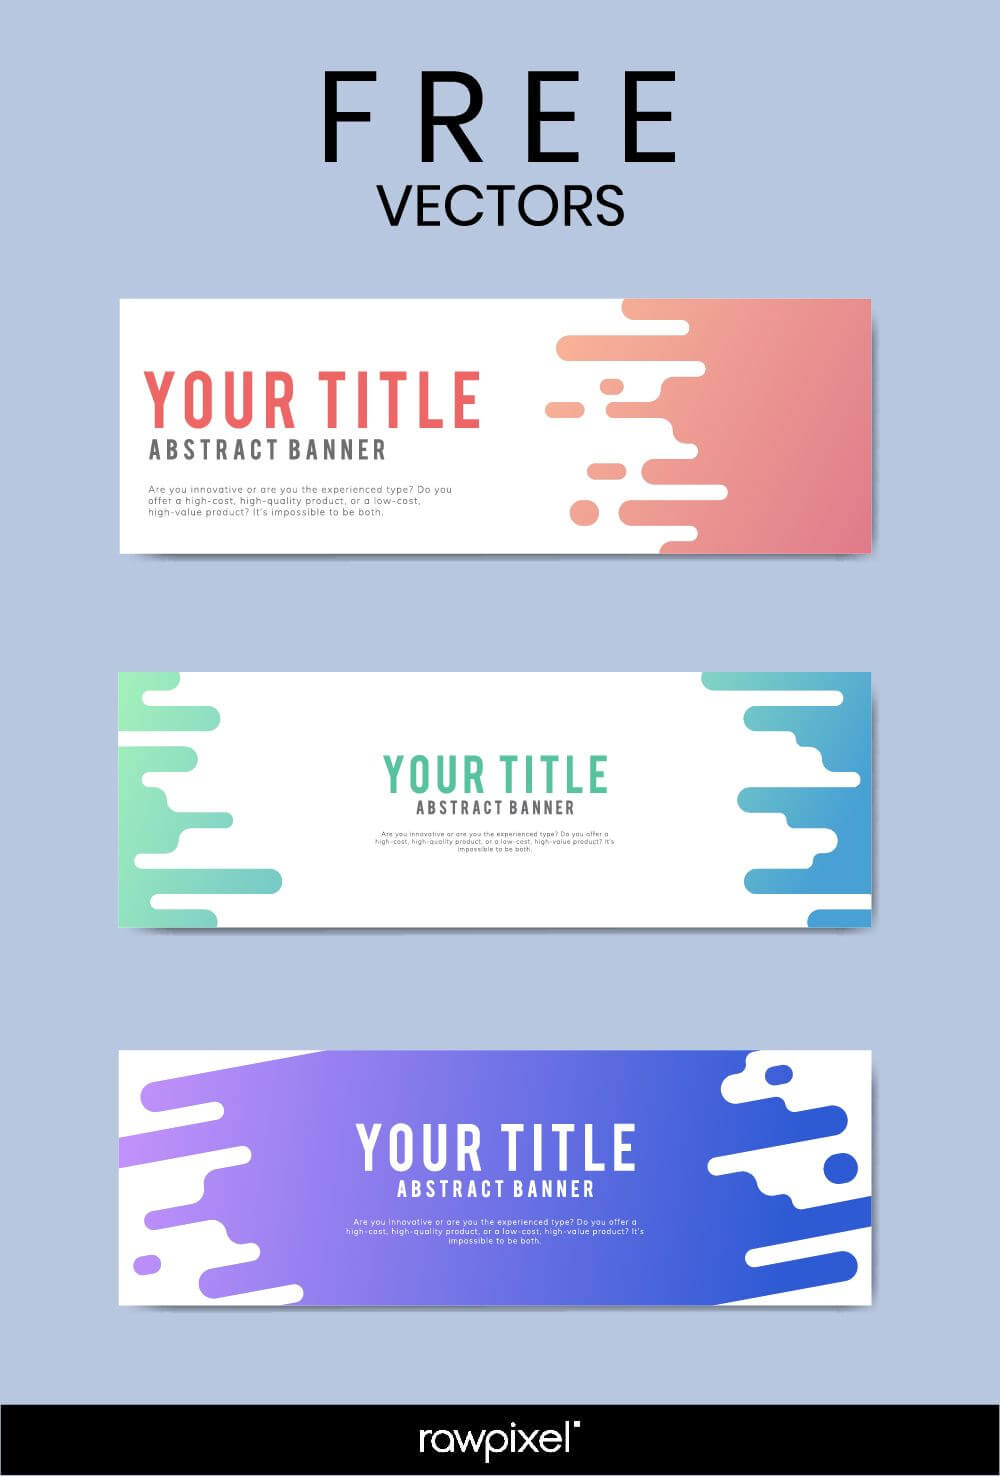 Download Free Modern Business Banner Templates At Rawpixel Throughout Free Website Banner Templates Download